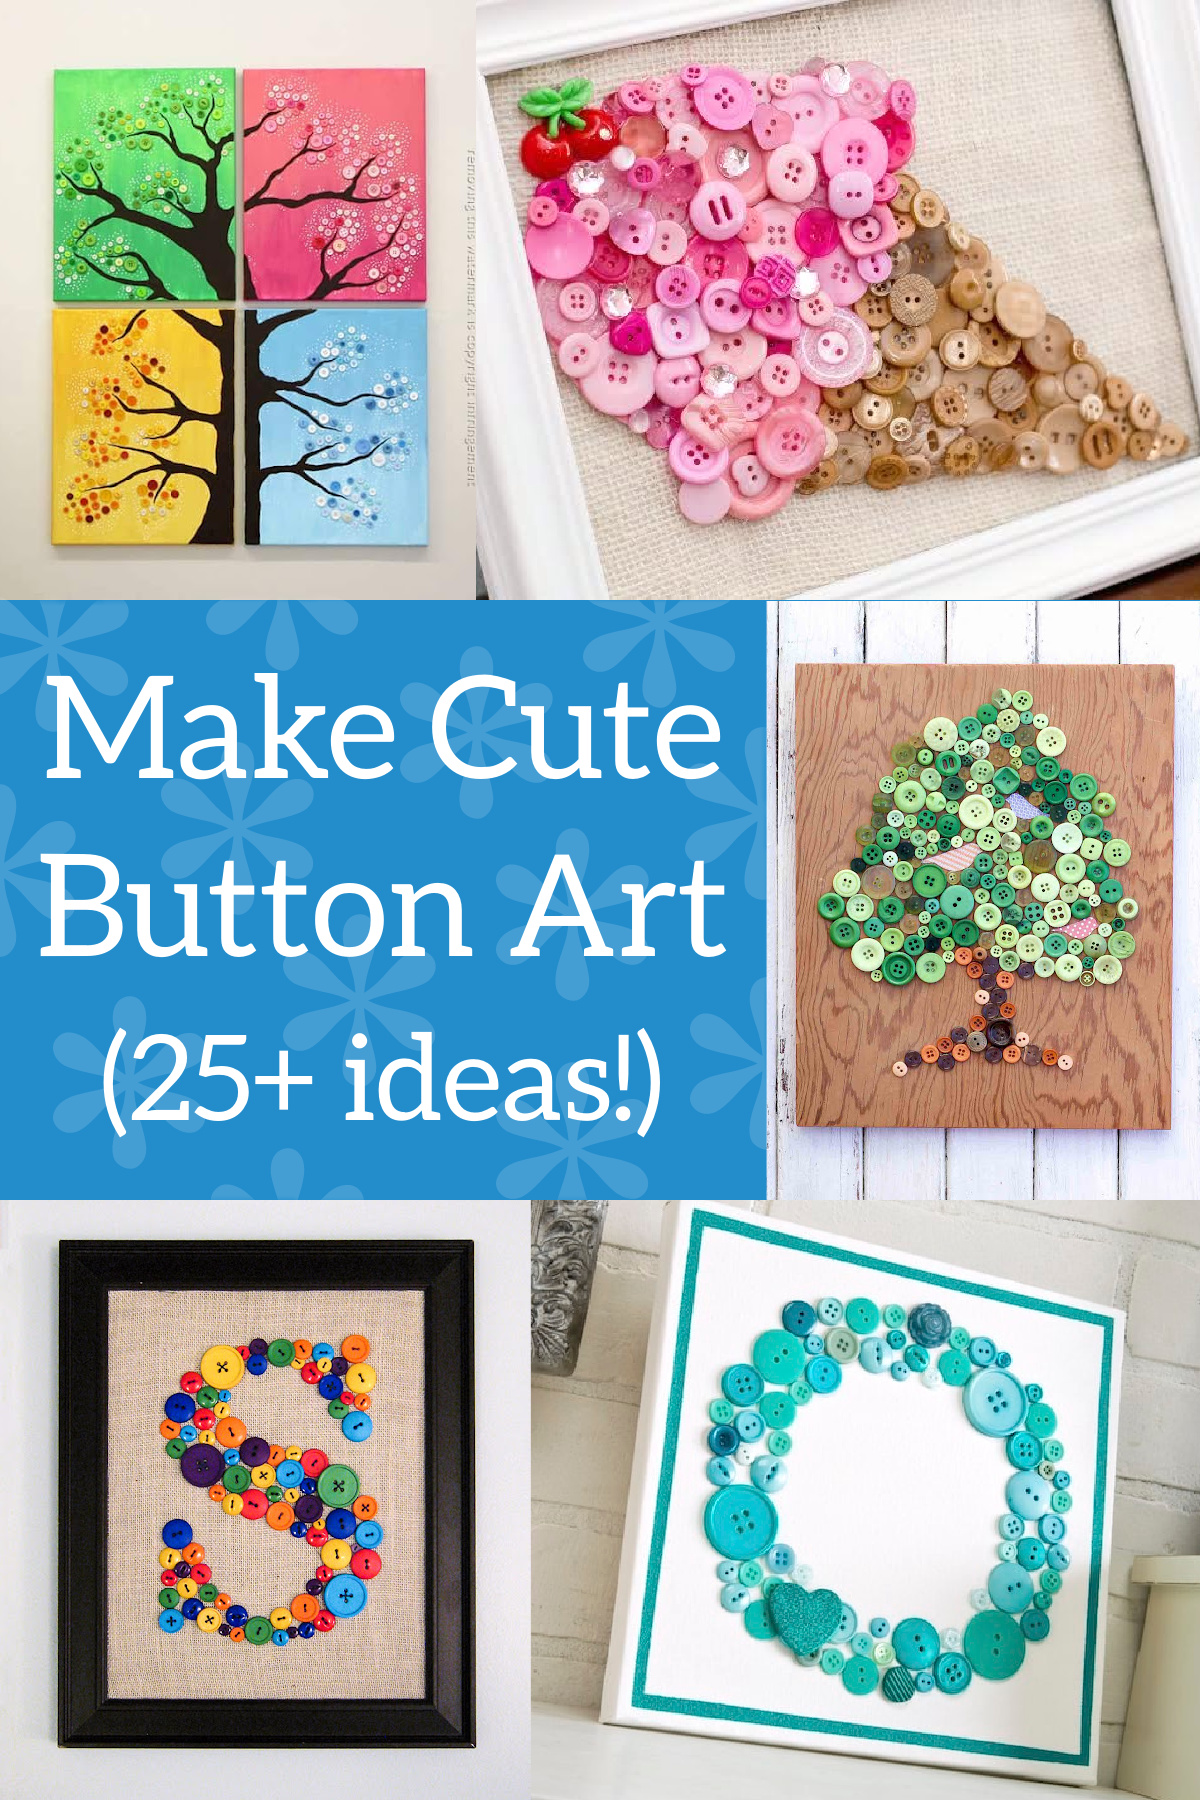 DIY Button Art for your walls